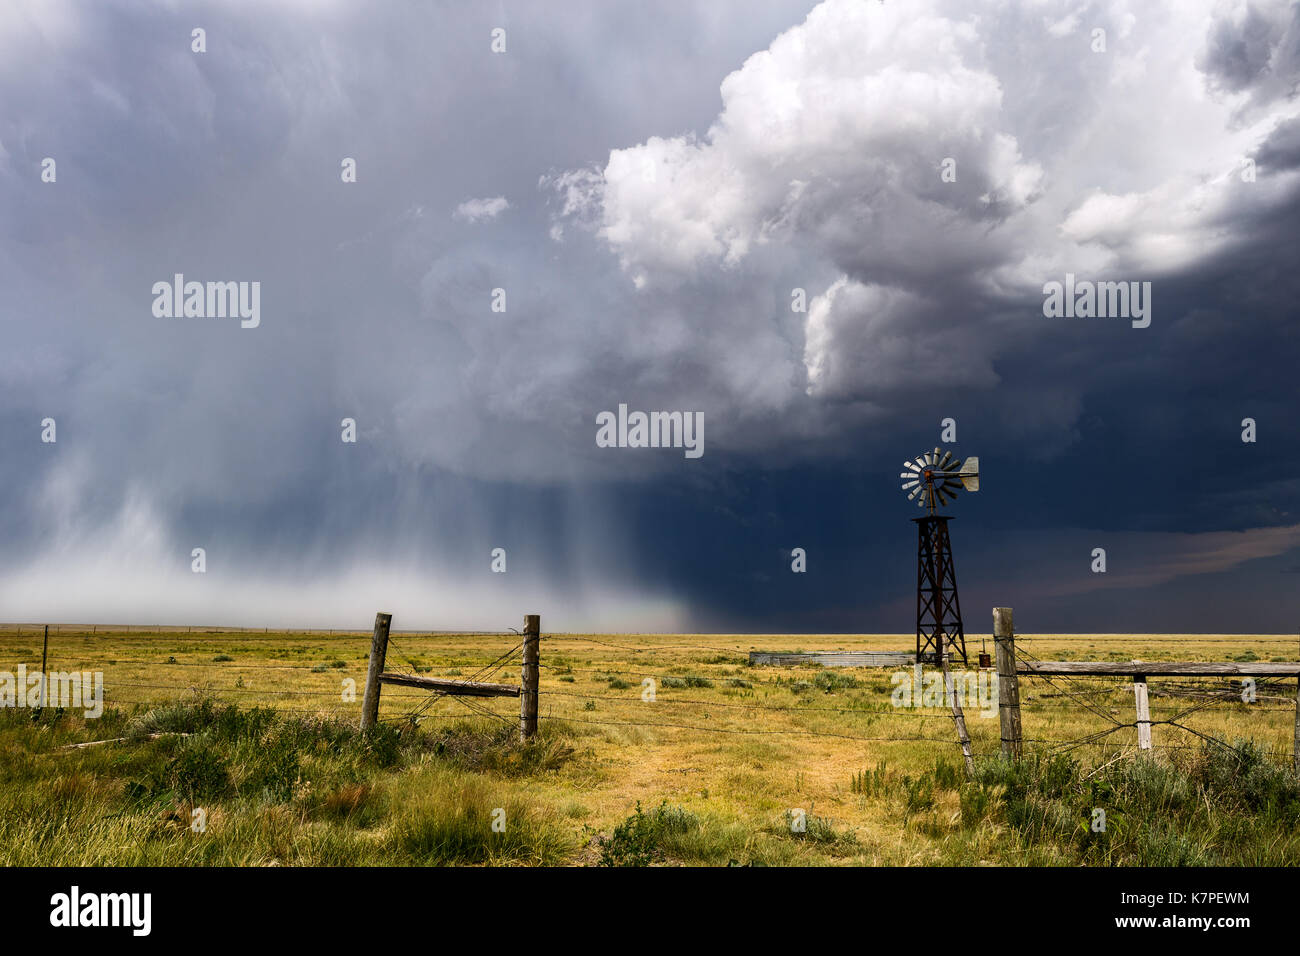 Hail storm in the Colorado plains Stock Photo